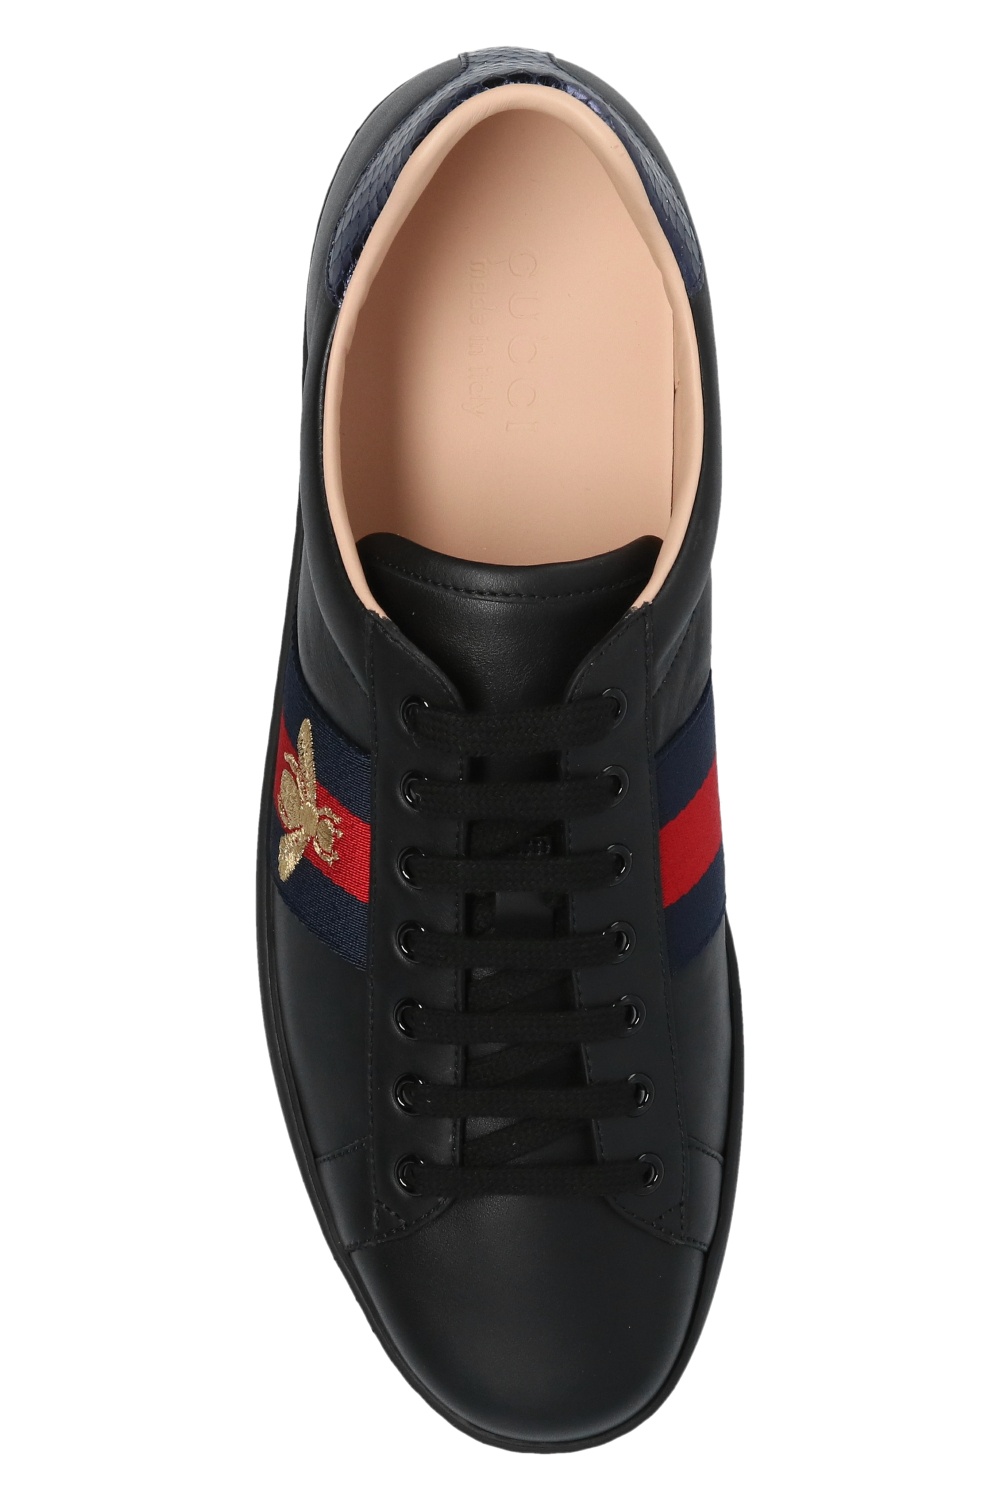 Gucci Bee-embroidered sneakers